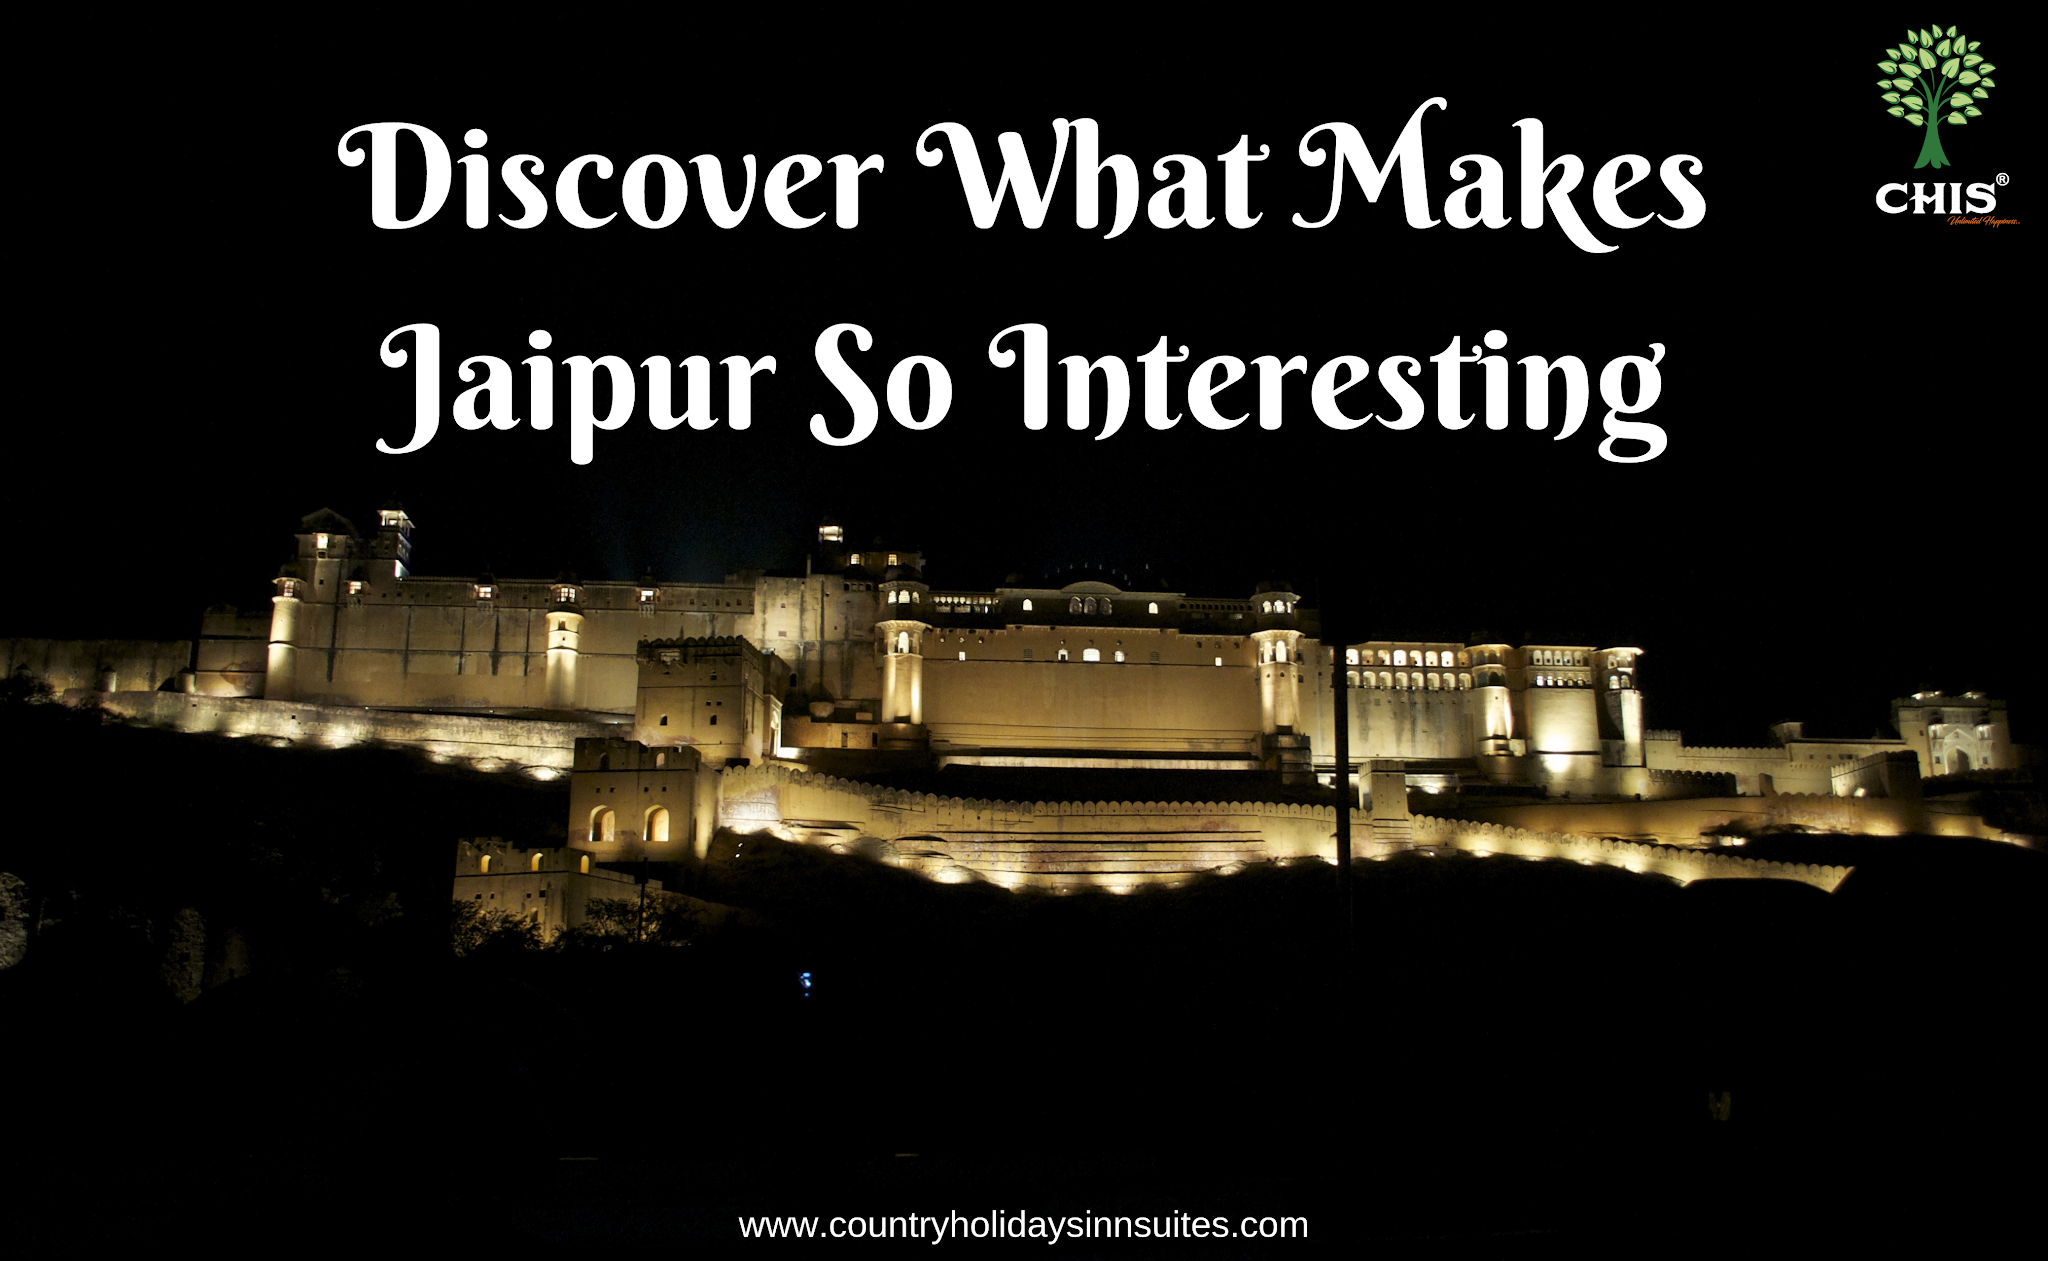 Discover What Makes Jaipur So Interesting